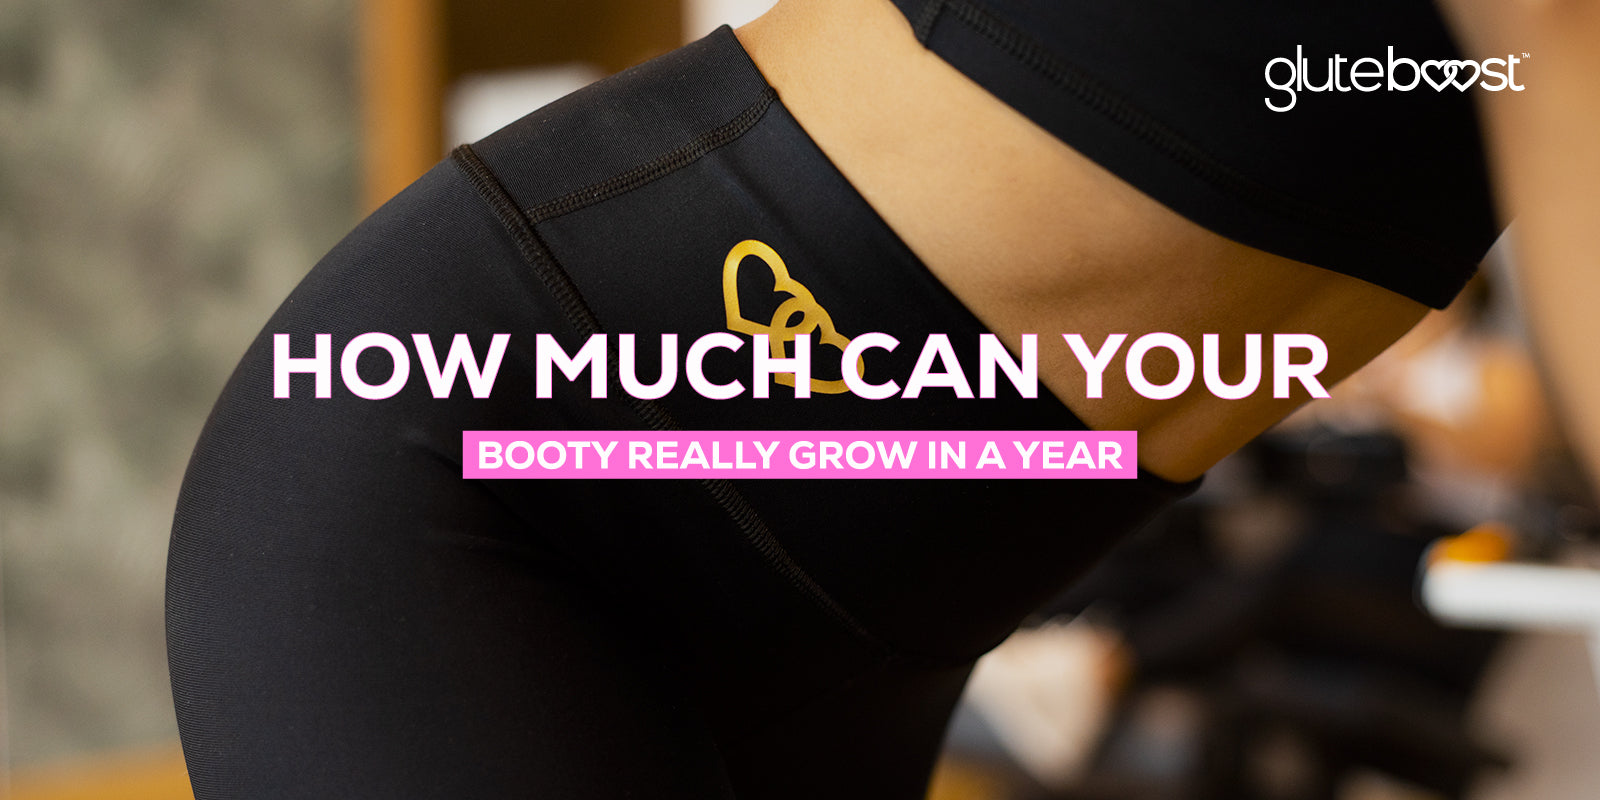 How Much Can Your Booty REALLY Grow in a Year?